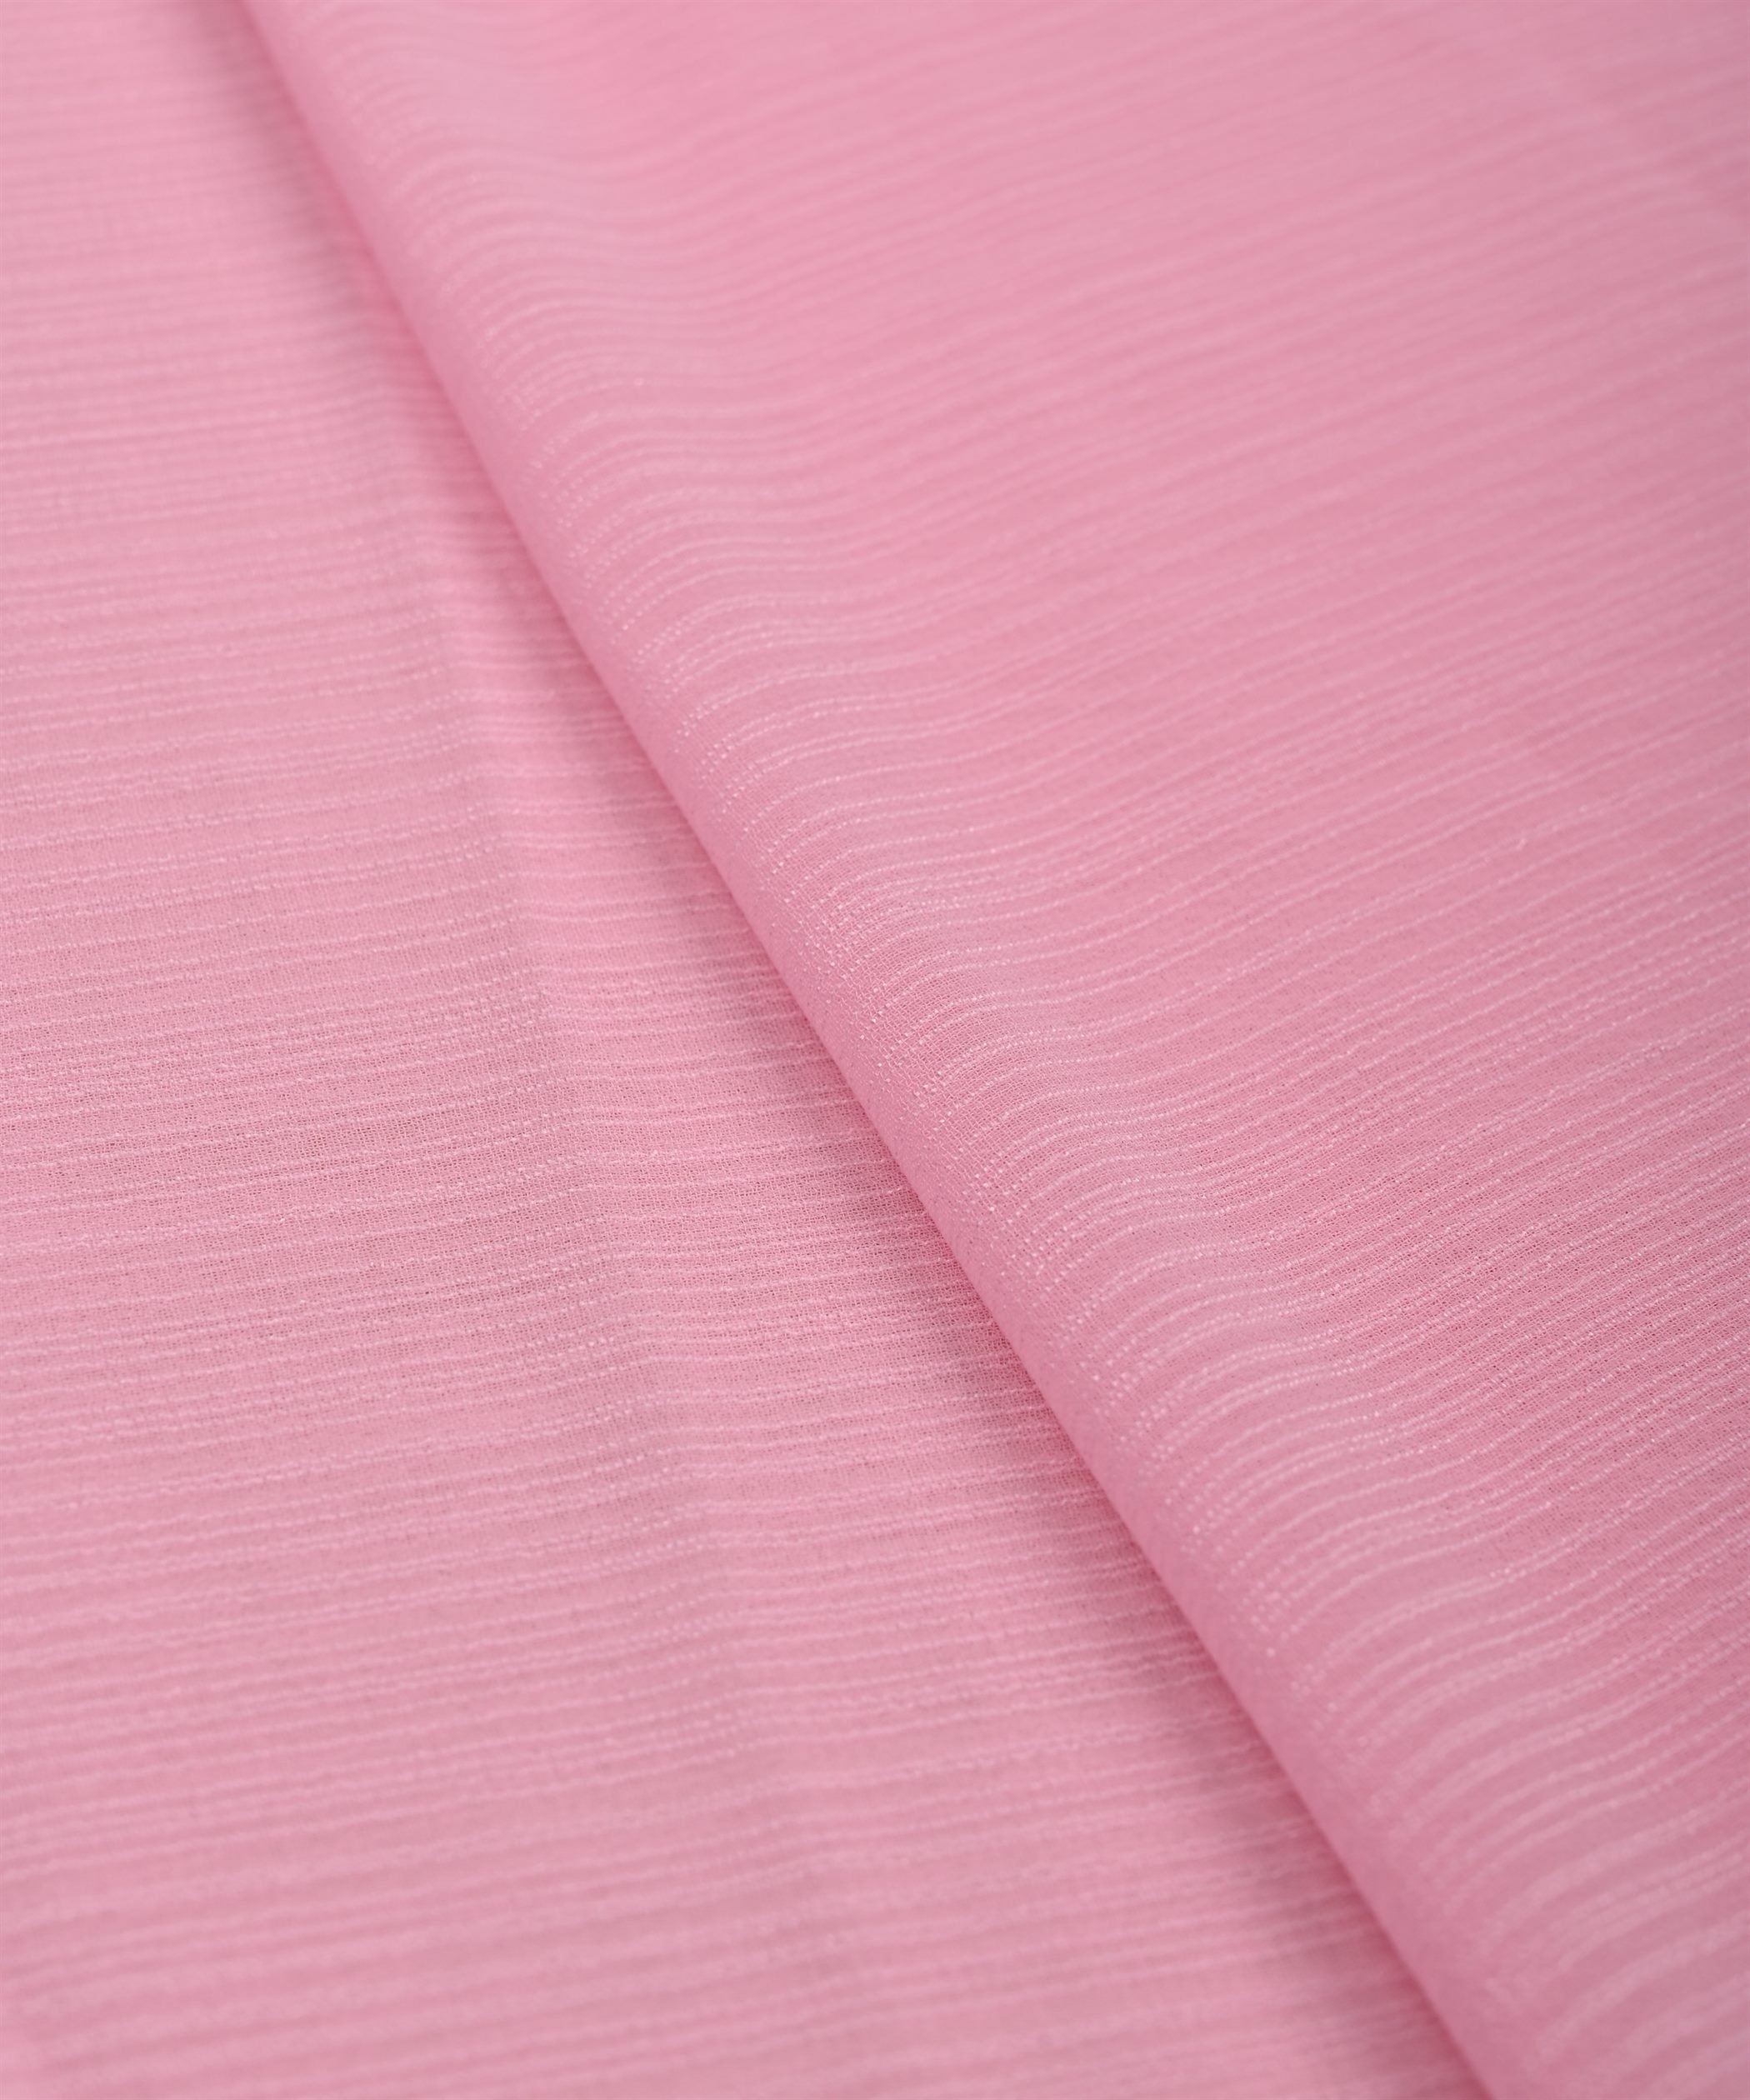 Buy Baby Pink Georgette Fabric With Lining Online At Wholesale